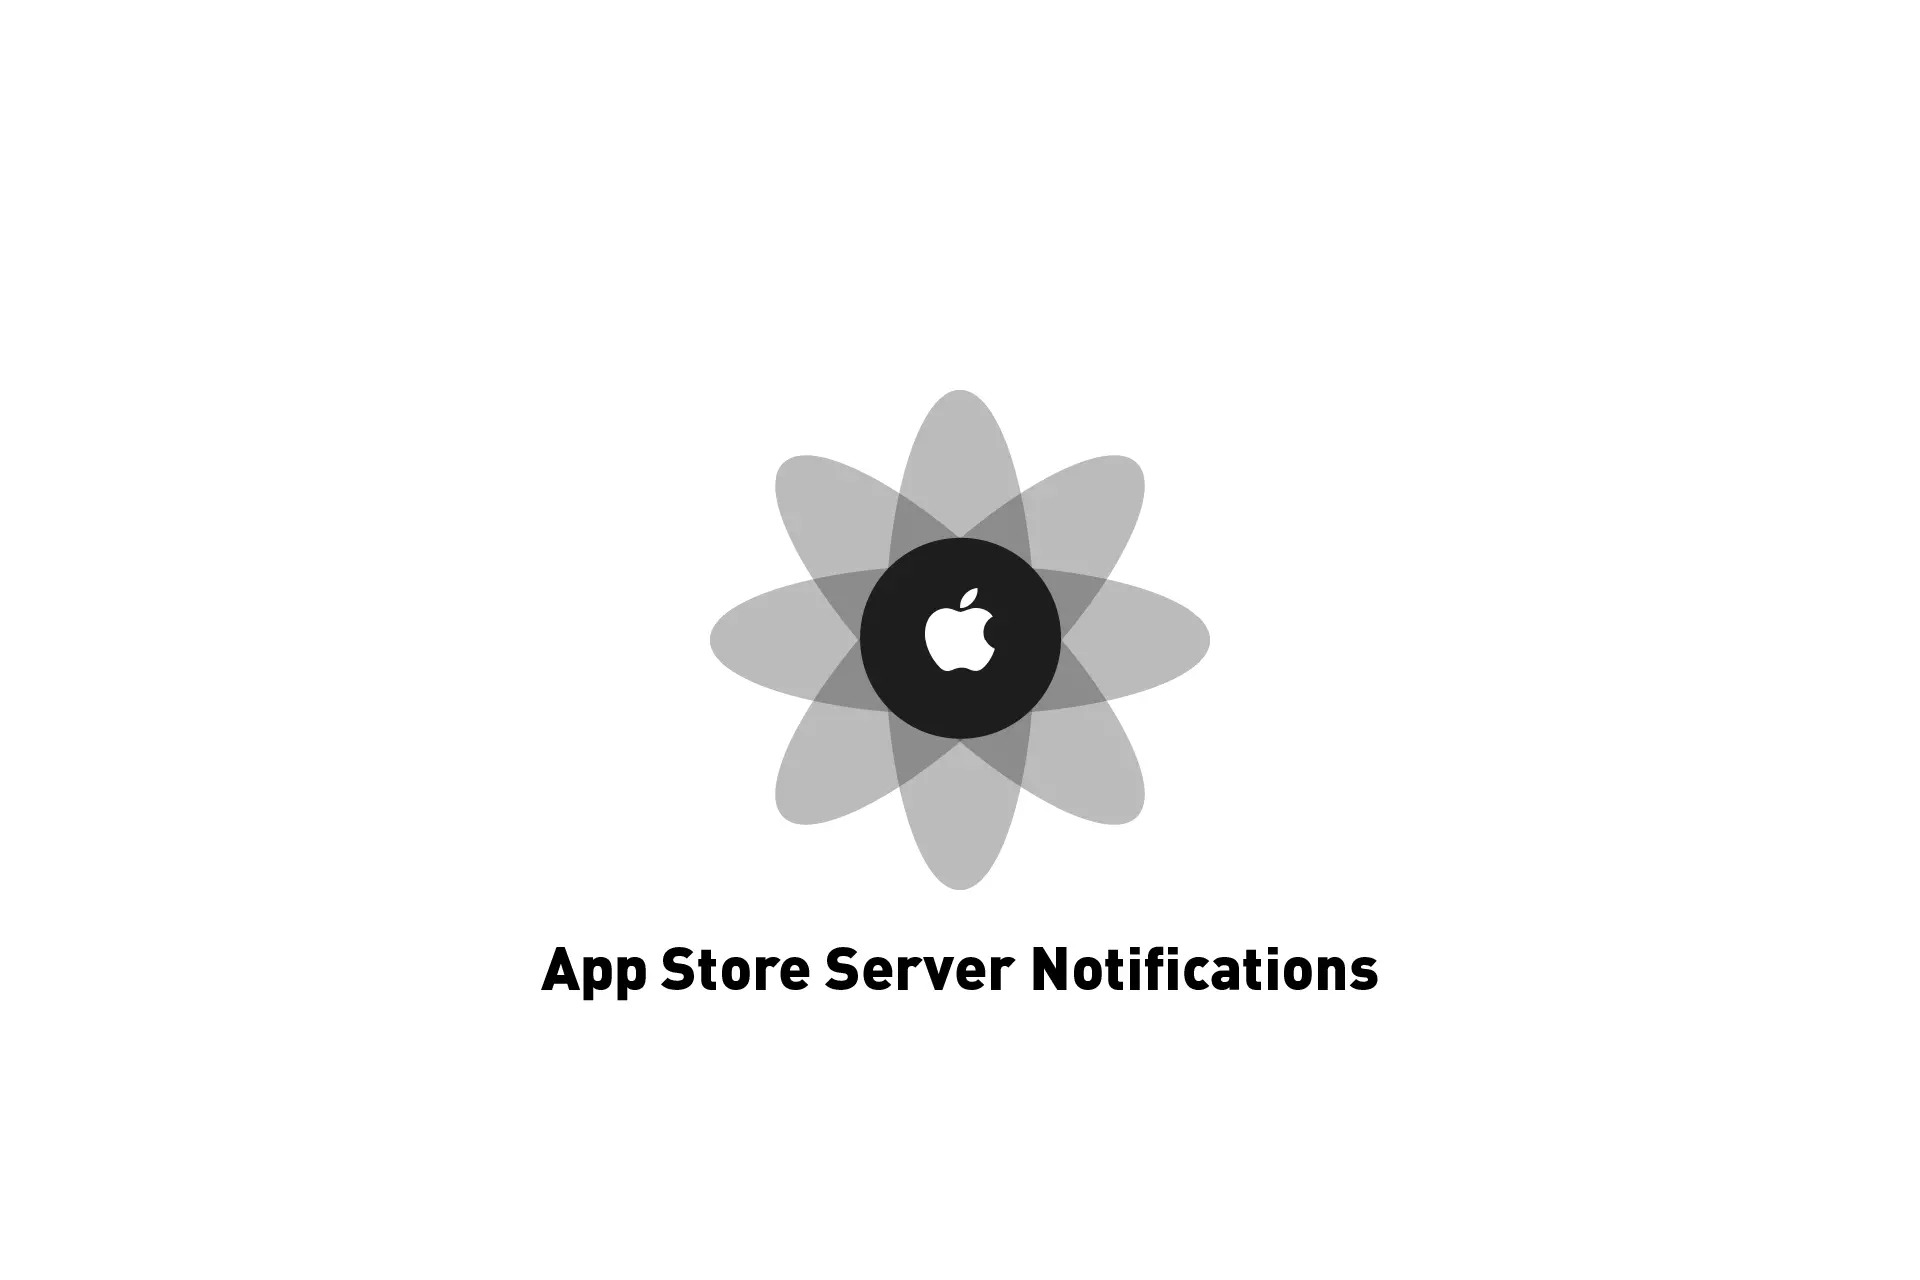 A flower that represents Apple with the text "App Store Server Notifications" beneath it.